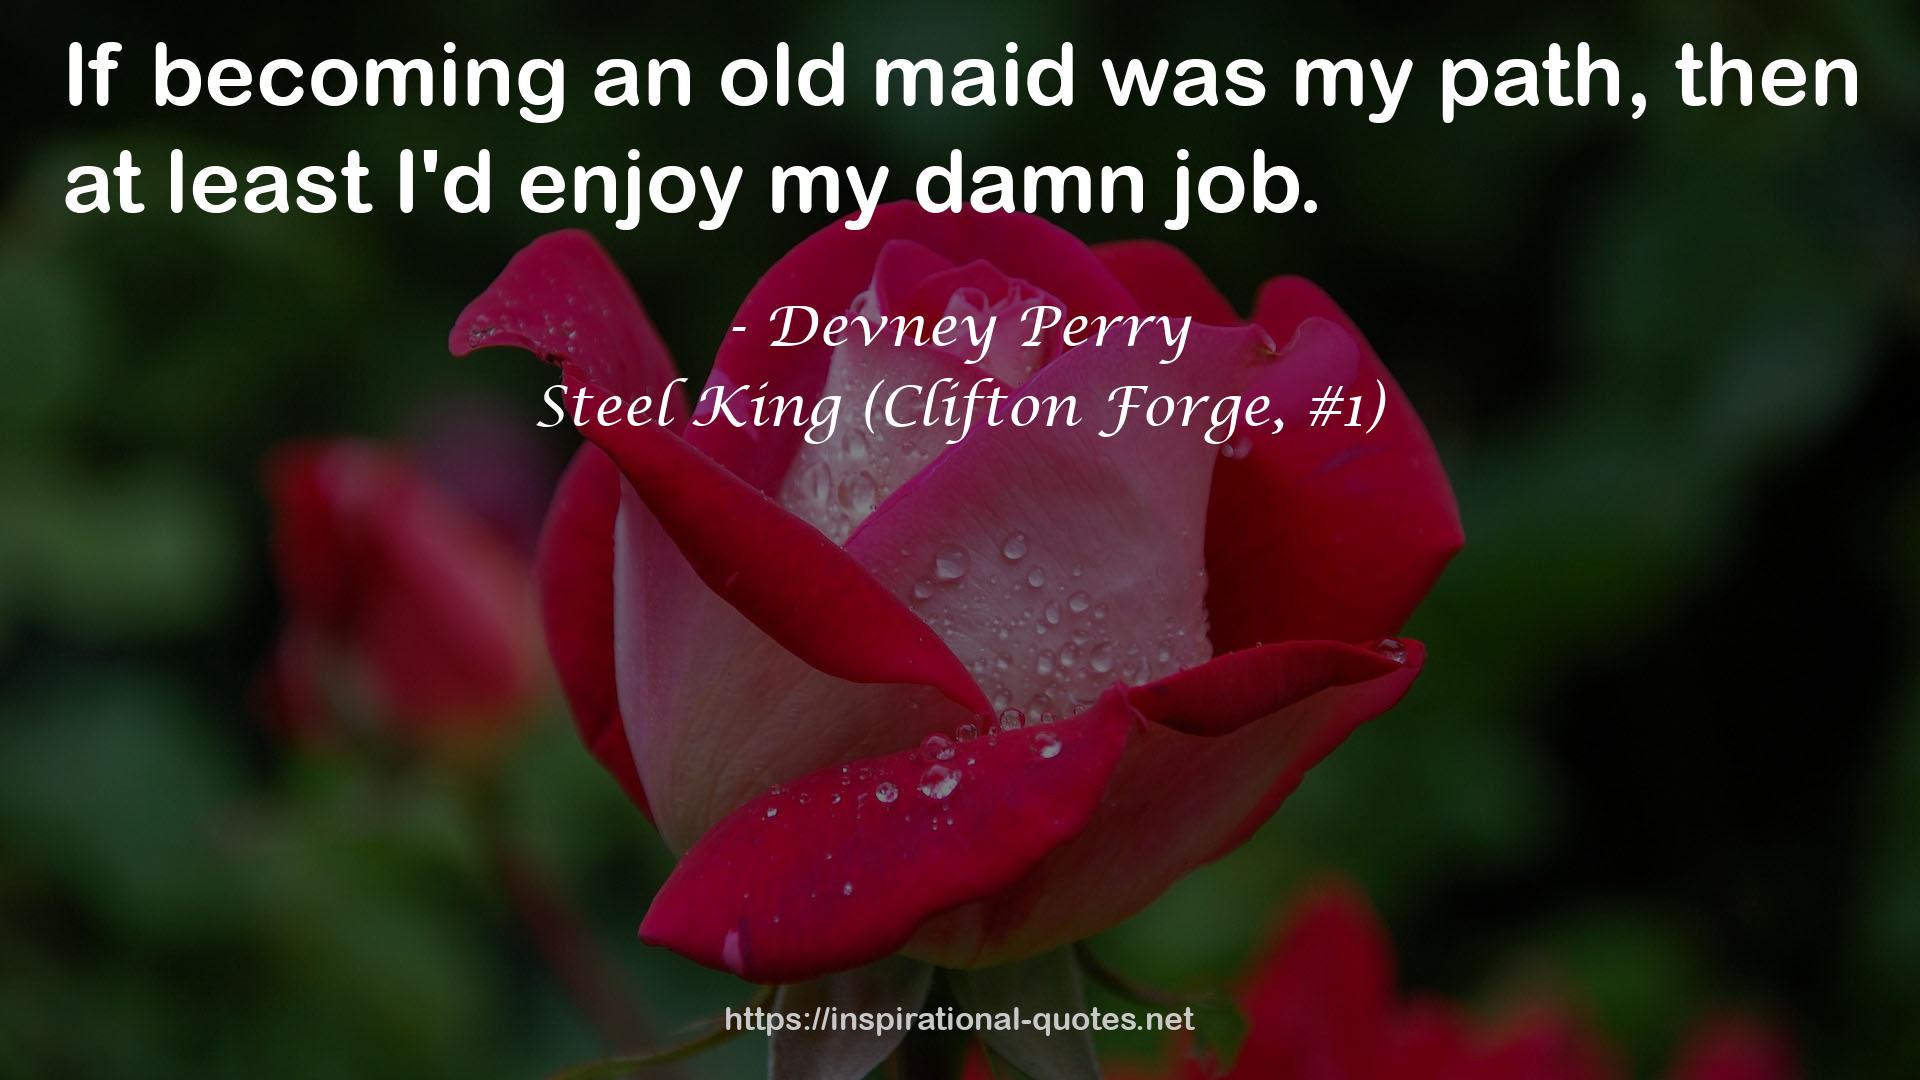 Steel King (Clifton Forge, #1) QUOTES